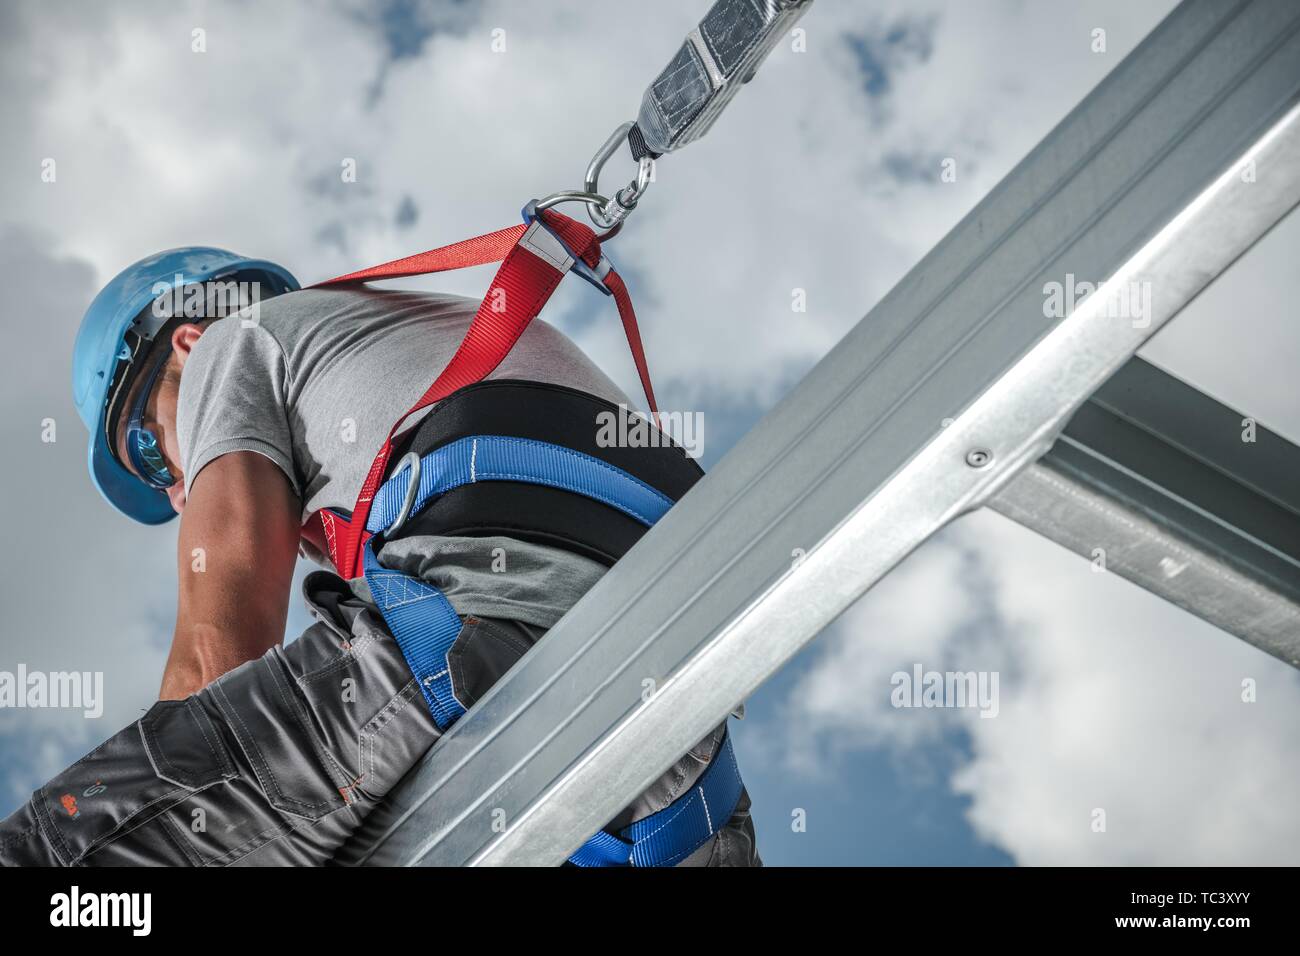 Safety Harness Equipment. Caucasian Contractor in His 30s on a Steel Building Frame. Shock Absorbing Lanyard Stock Photo